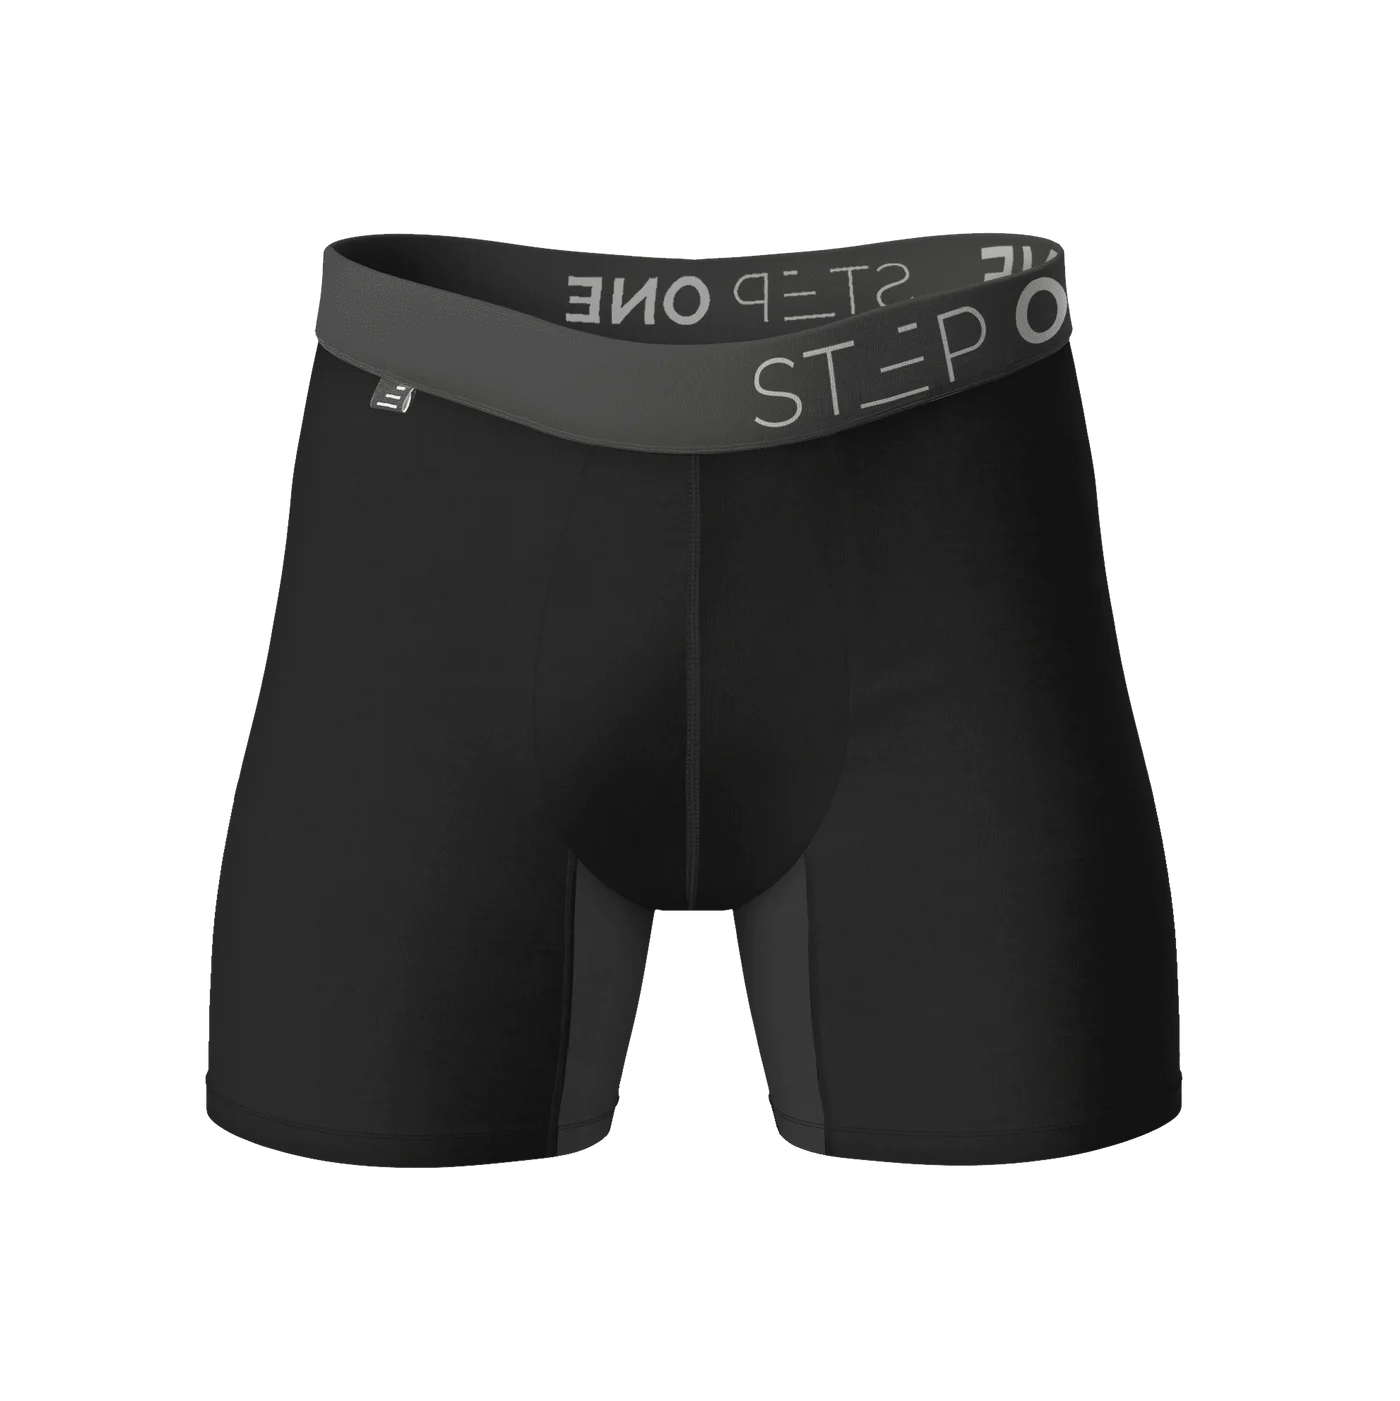 ohe Underwear - Selling soft, comfortable bamboo underwear for men